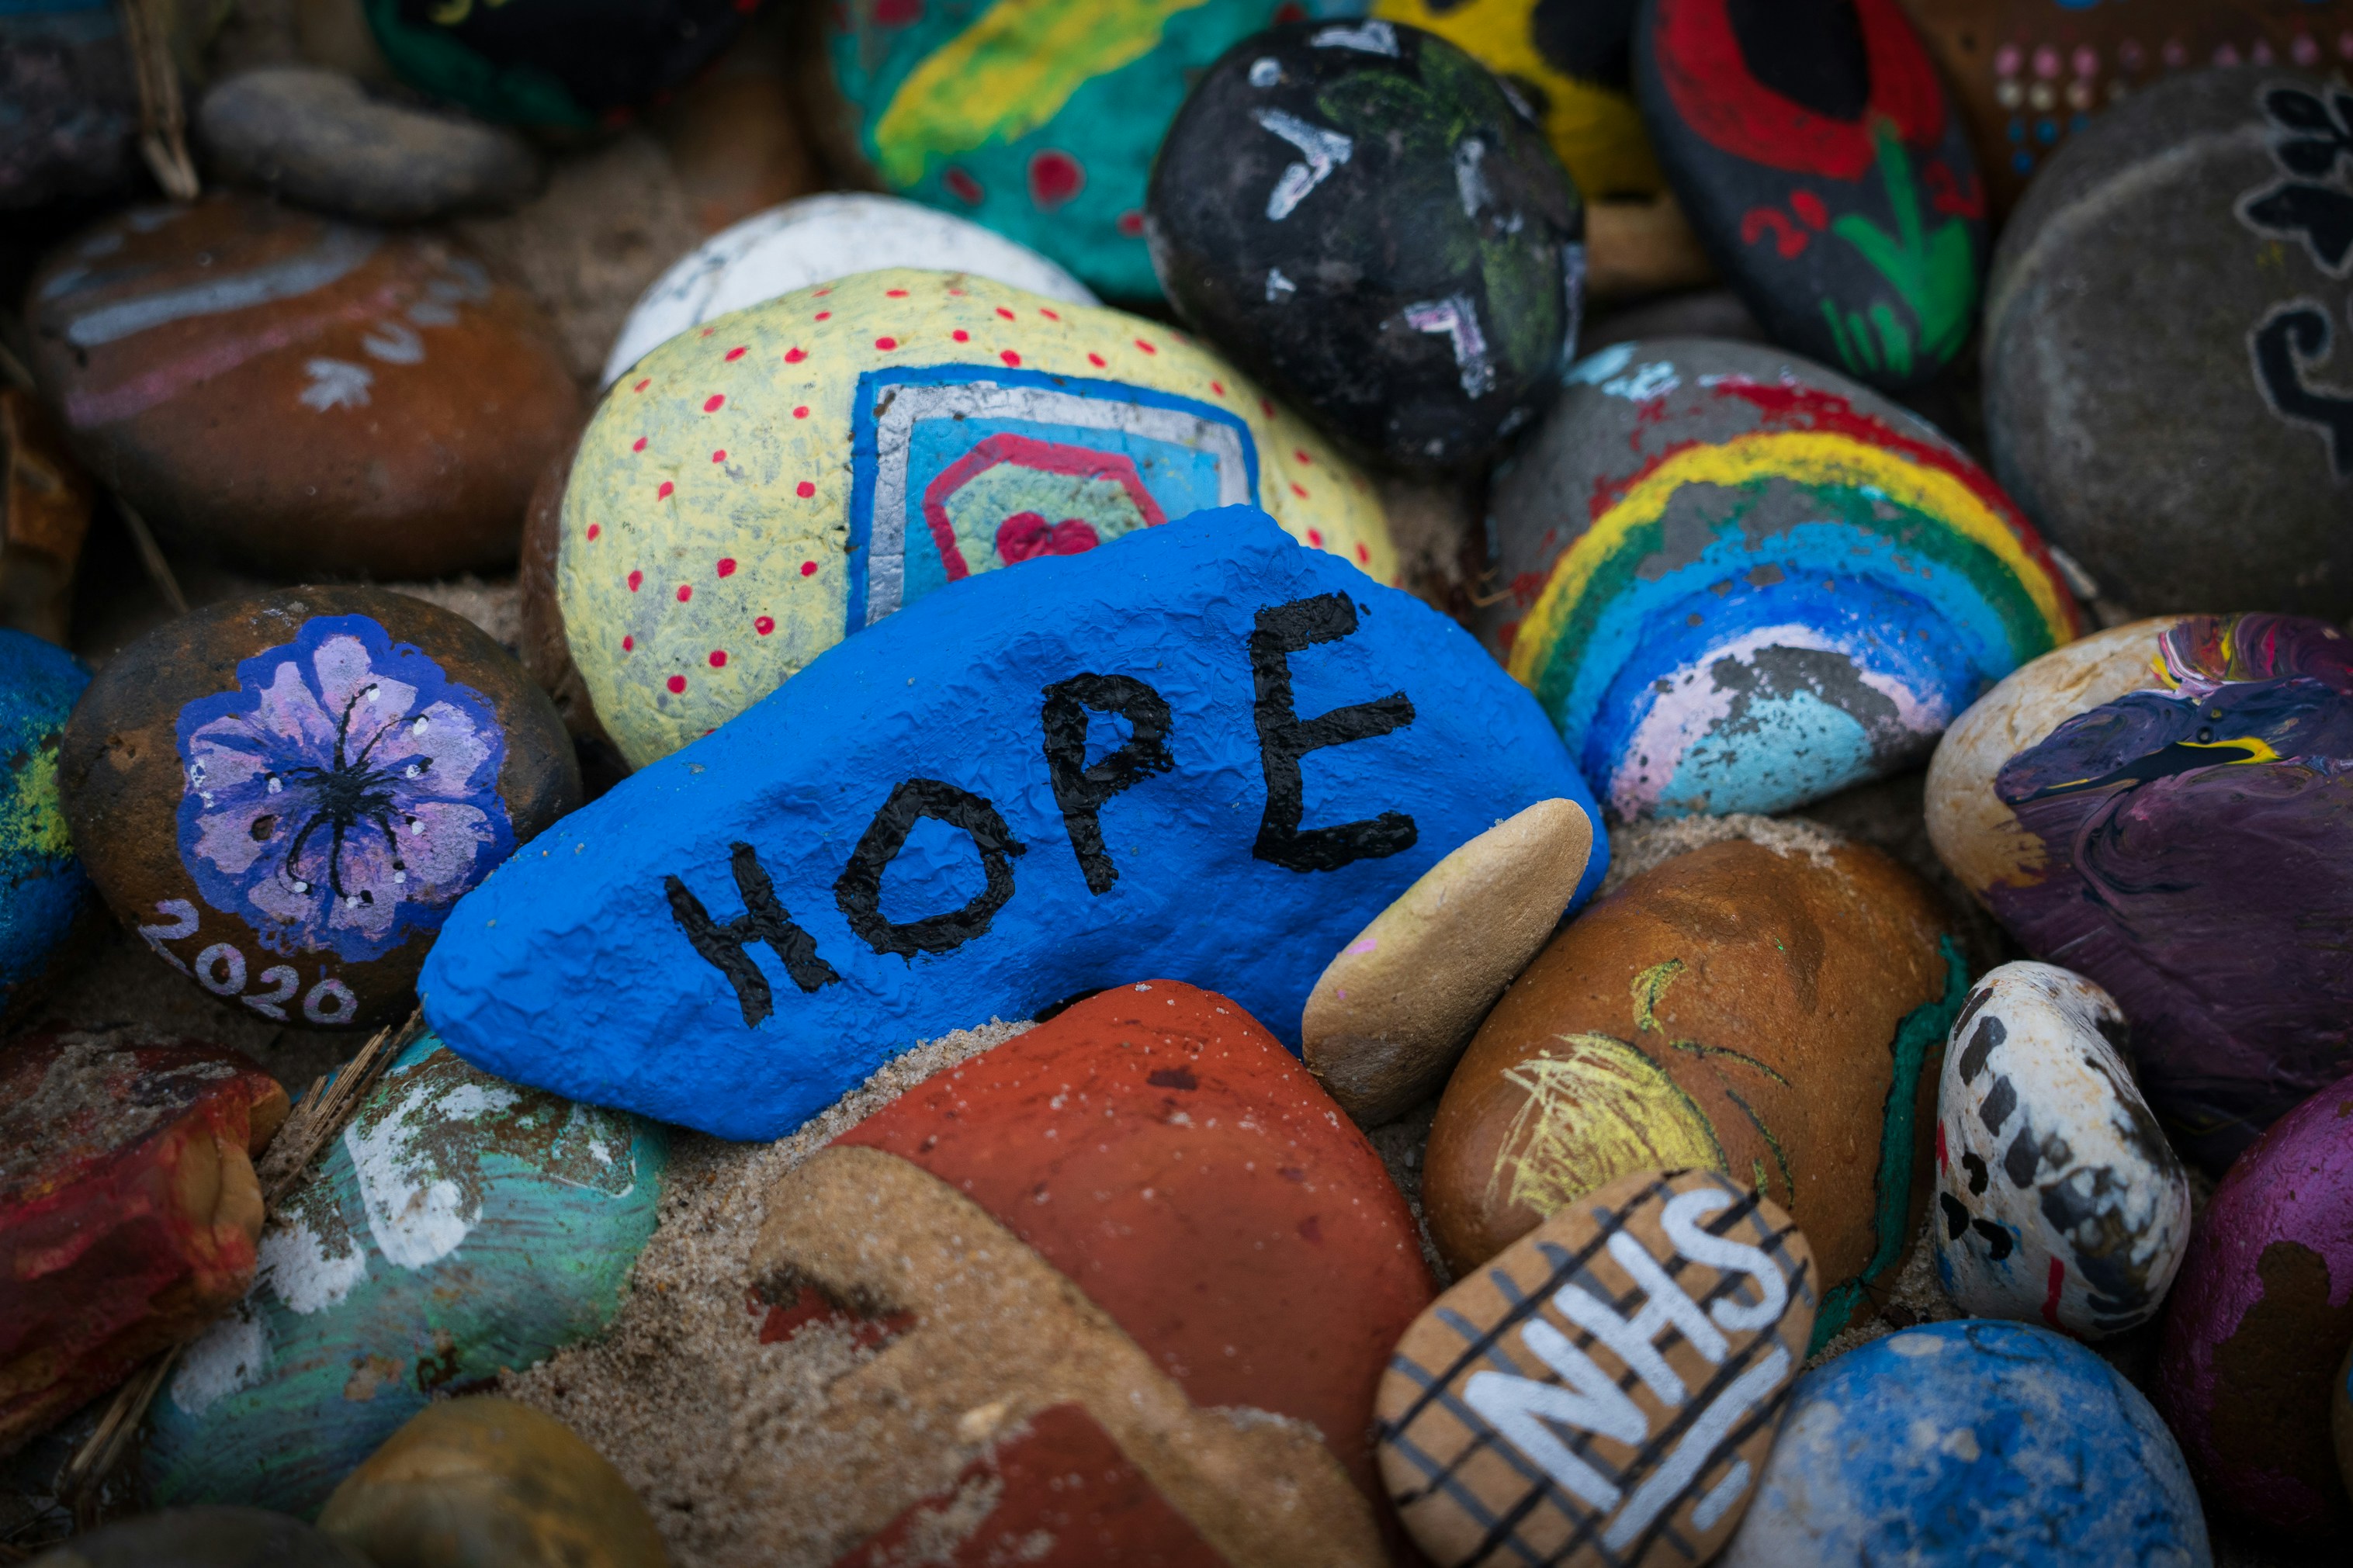 A pebble painted blue, with the word hope written on it in black.